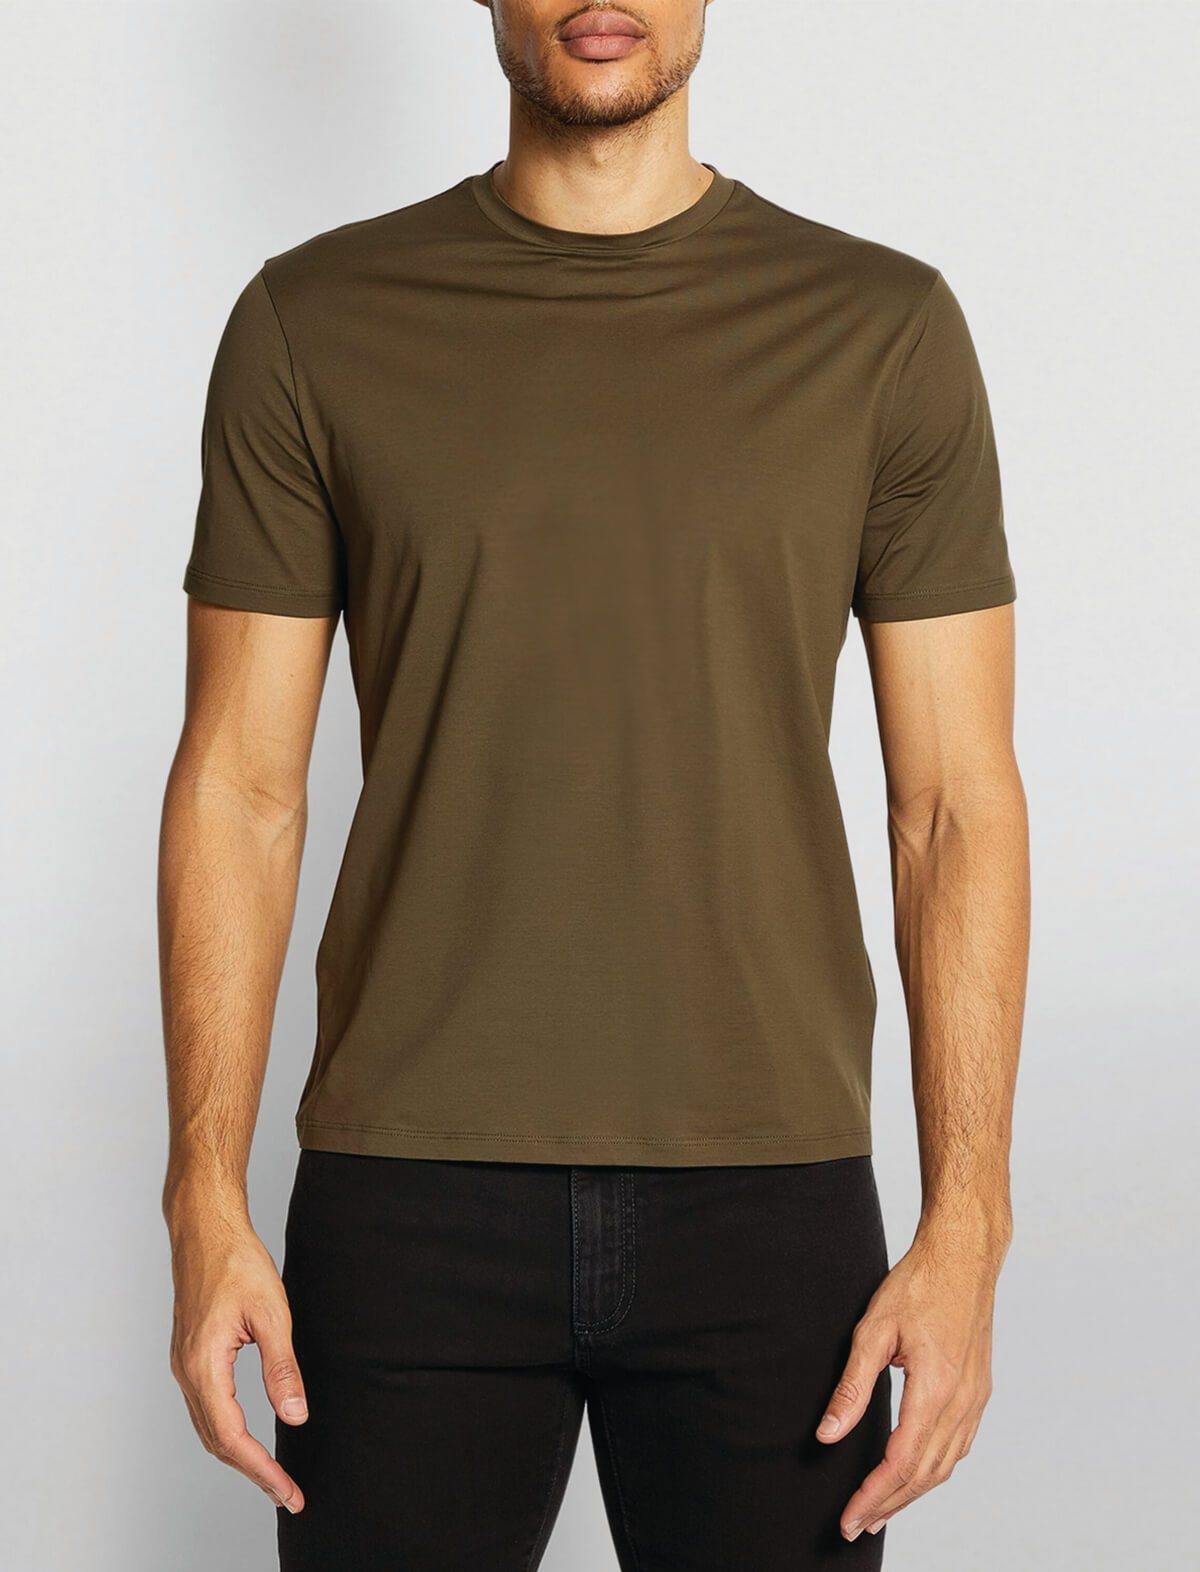 HERNO Superfine Cotton Stretch T-Shirt In Military Green | CLOSET Singapore